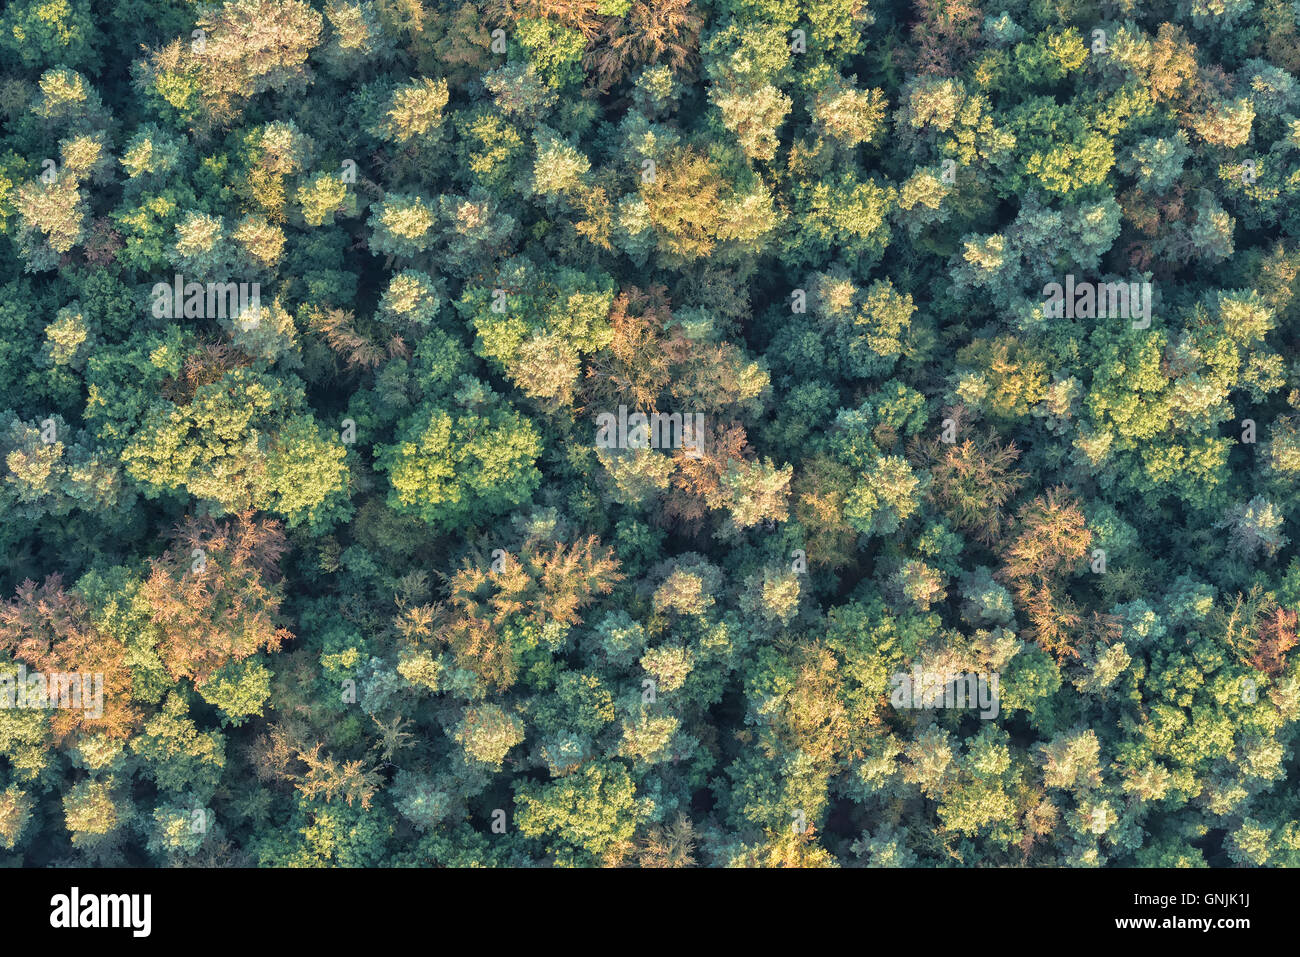 aerial view of trees in a continental forest Stock Photo